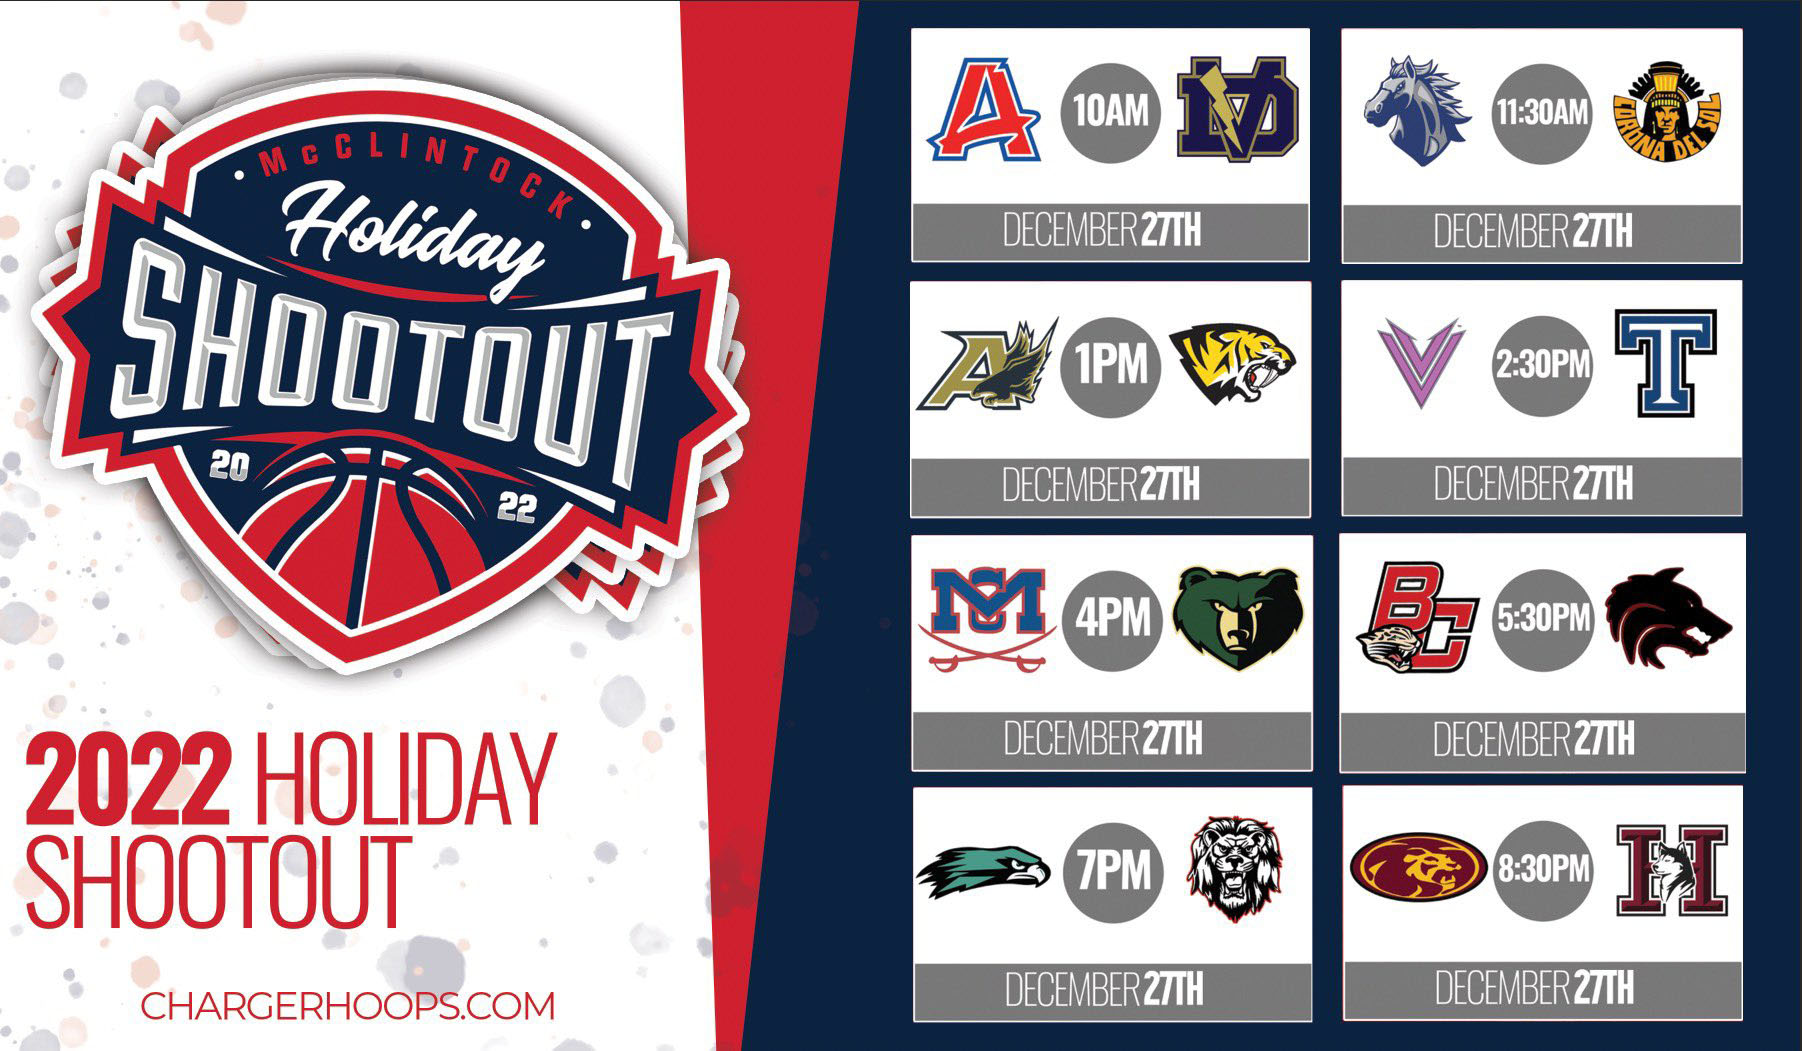 Gameday 2 of the McClintock Holiday Shootout 2022!